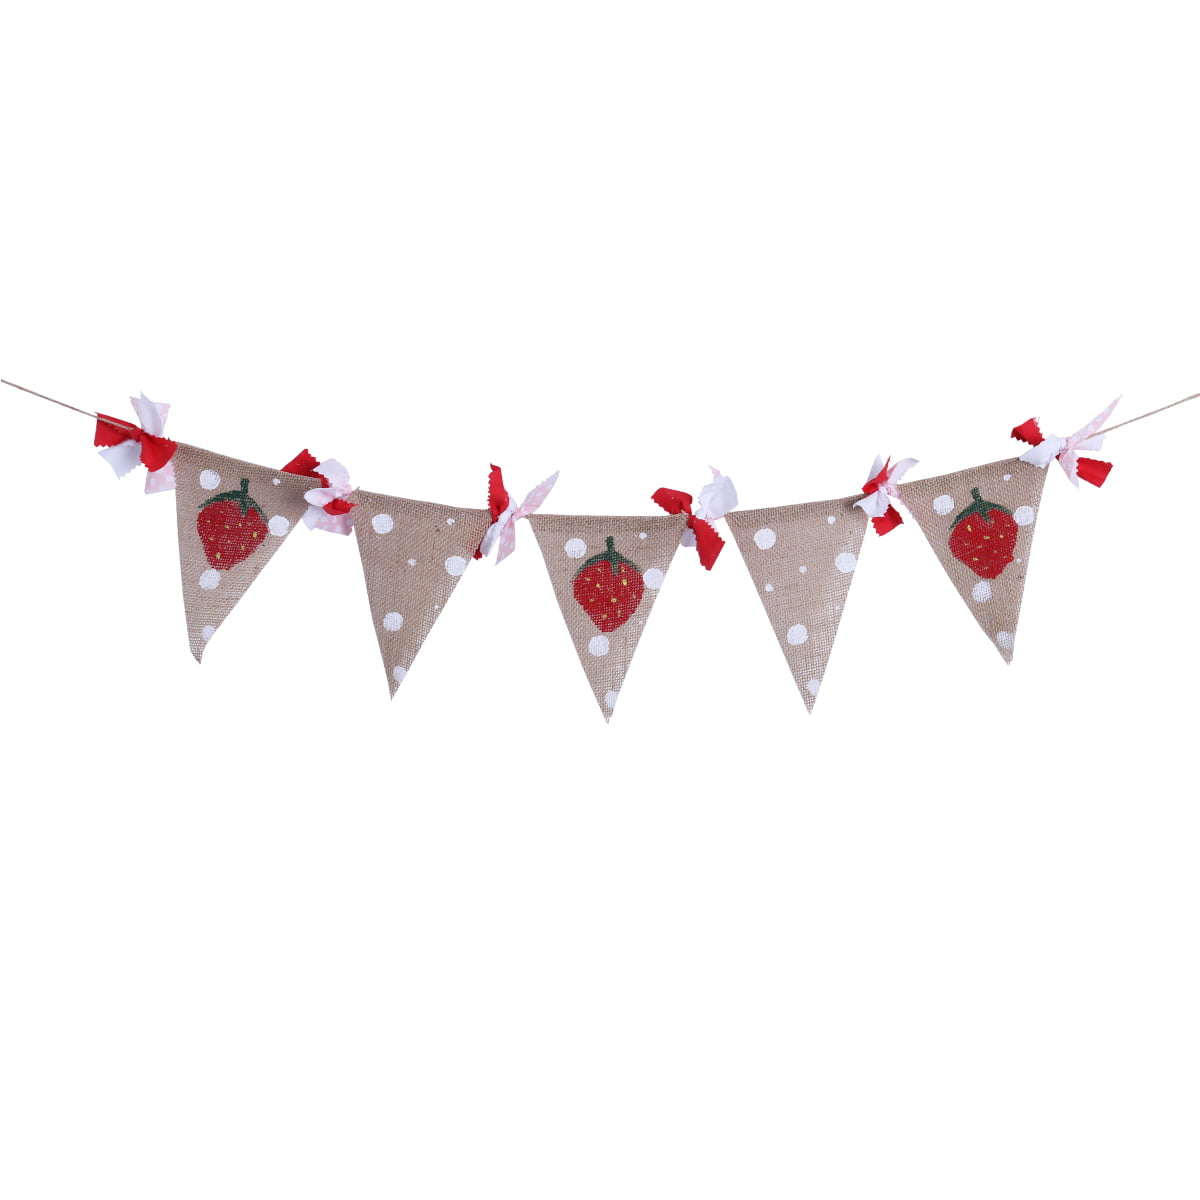 4×4 inch flags linen vintage style rose bunting  by pretty bunting 2m mini